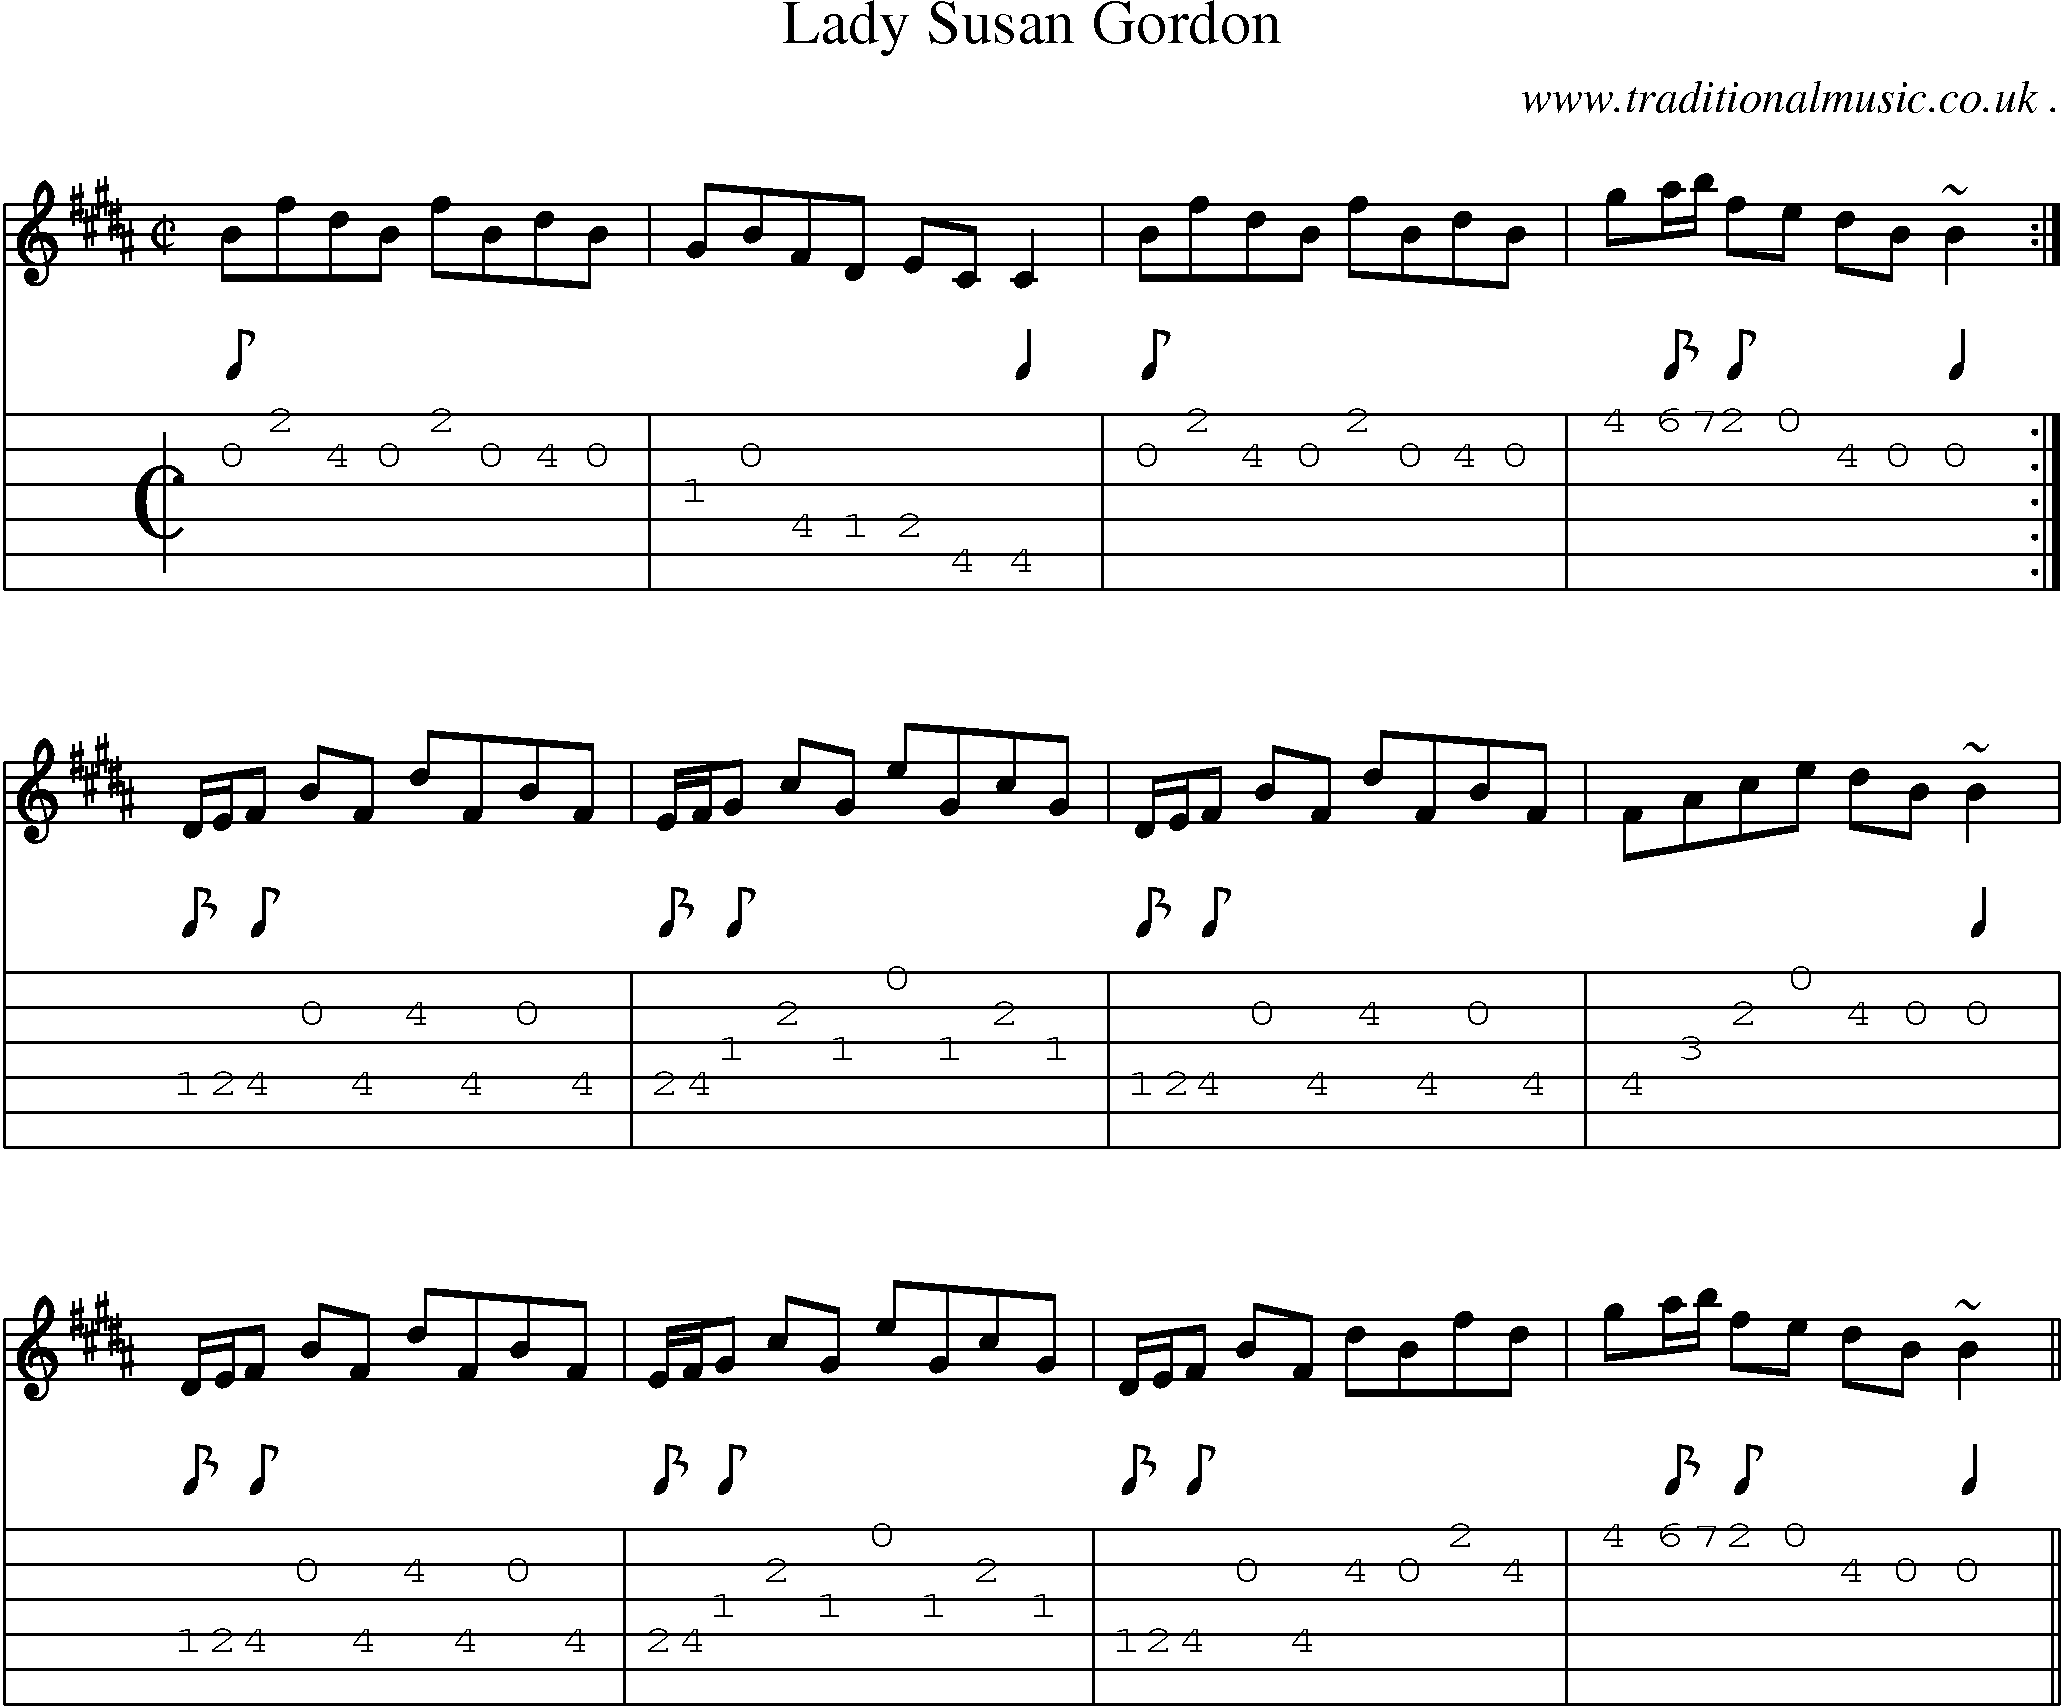 Sheet-music  score, Chords and Guitar Tabs for Lady Susan Gordon